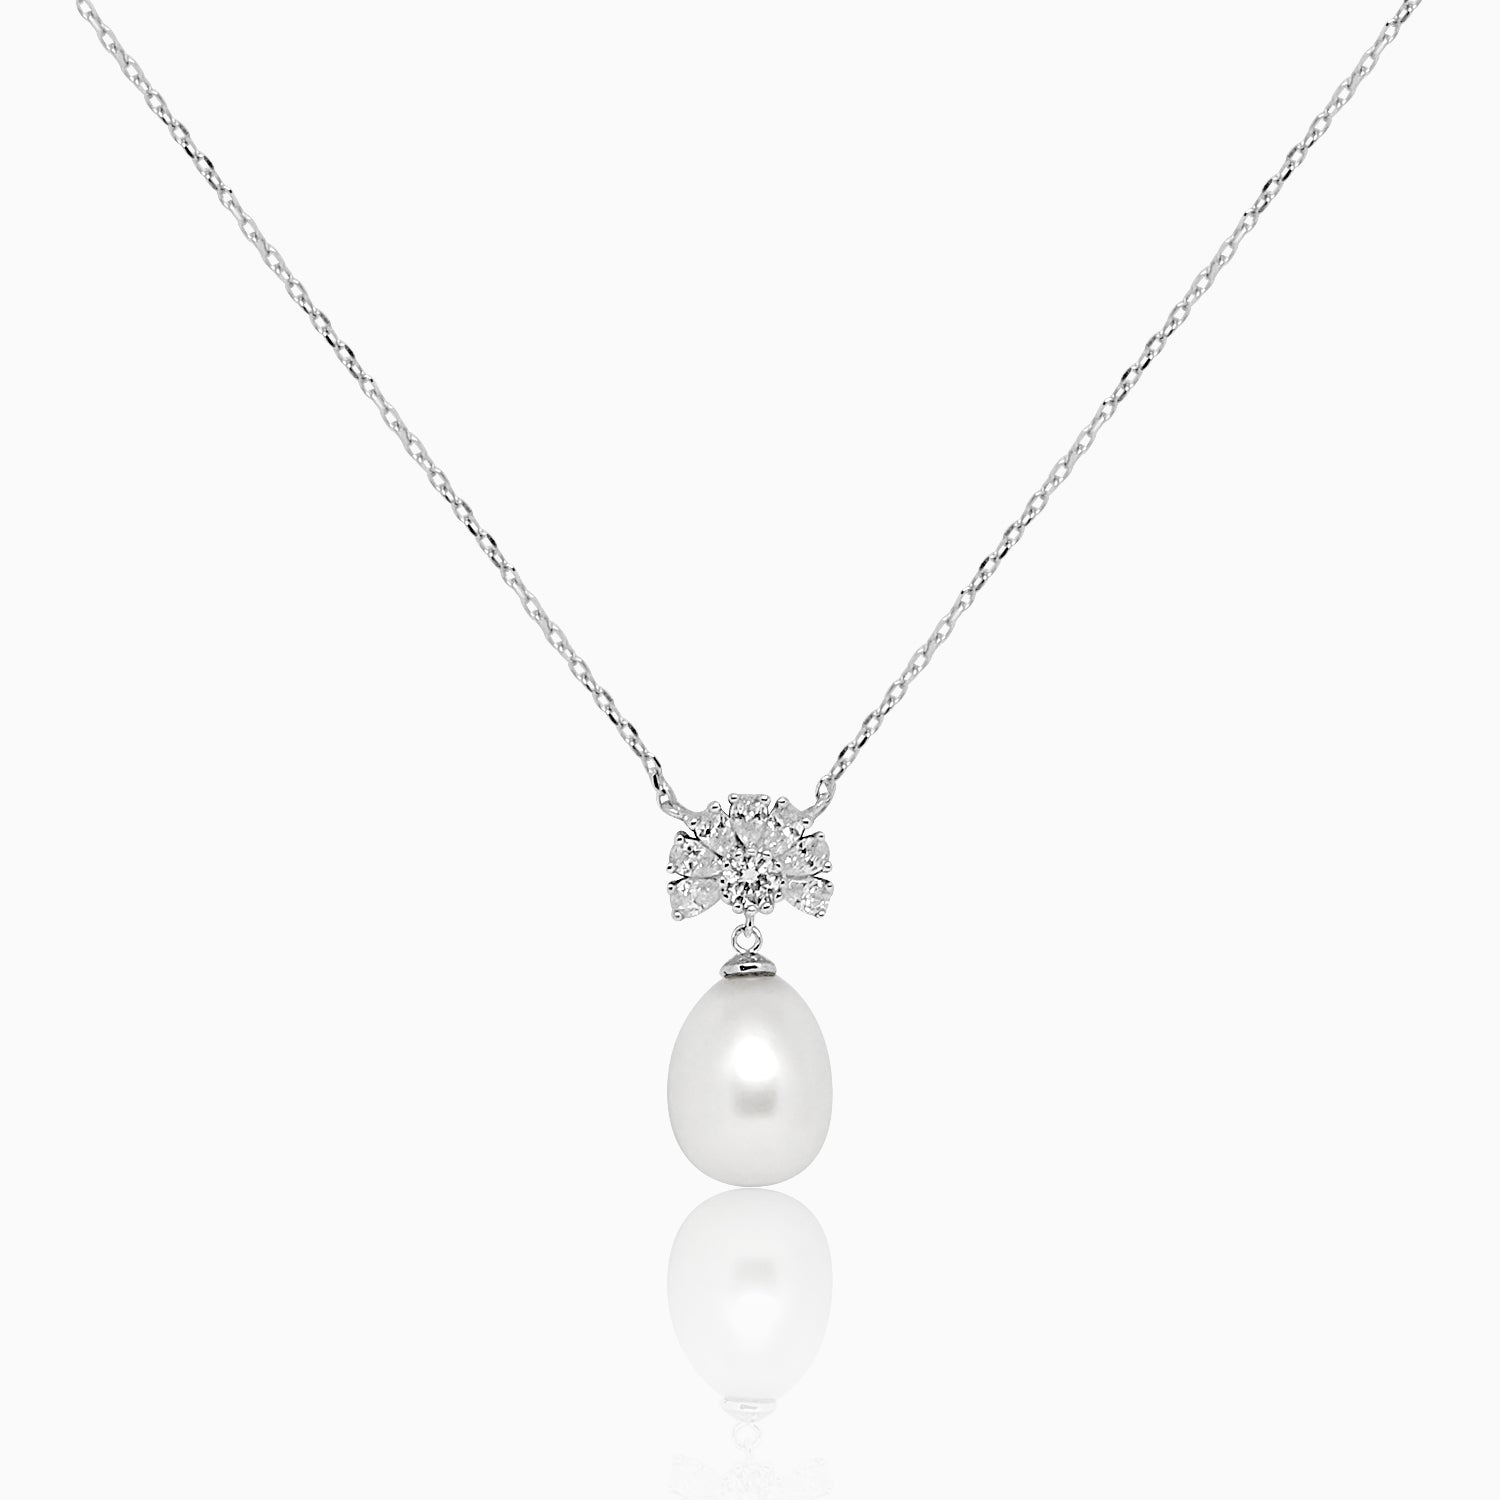 Silver Dangling Horizon Pearl Necklace